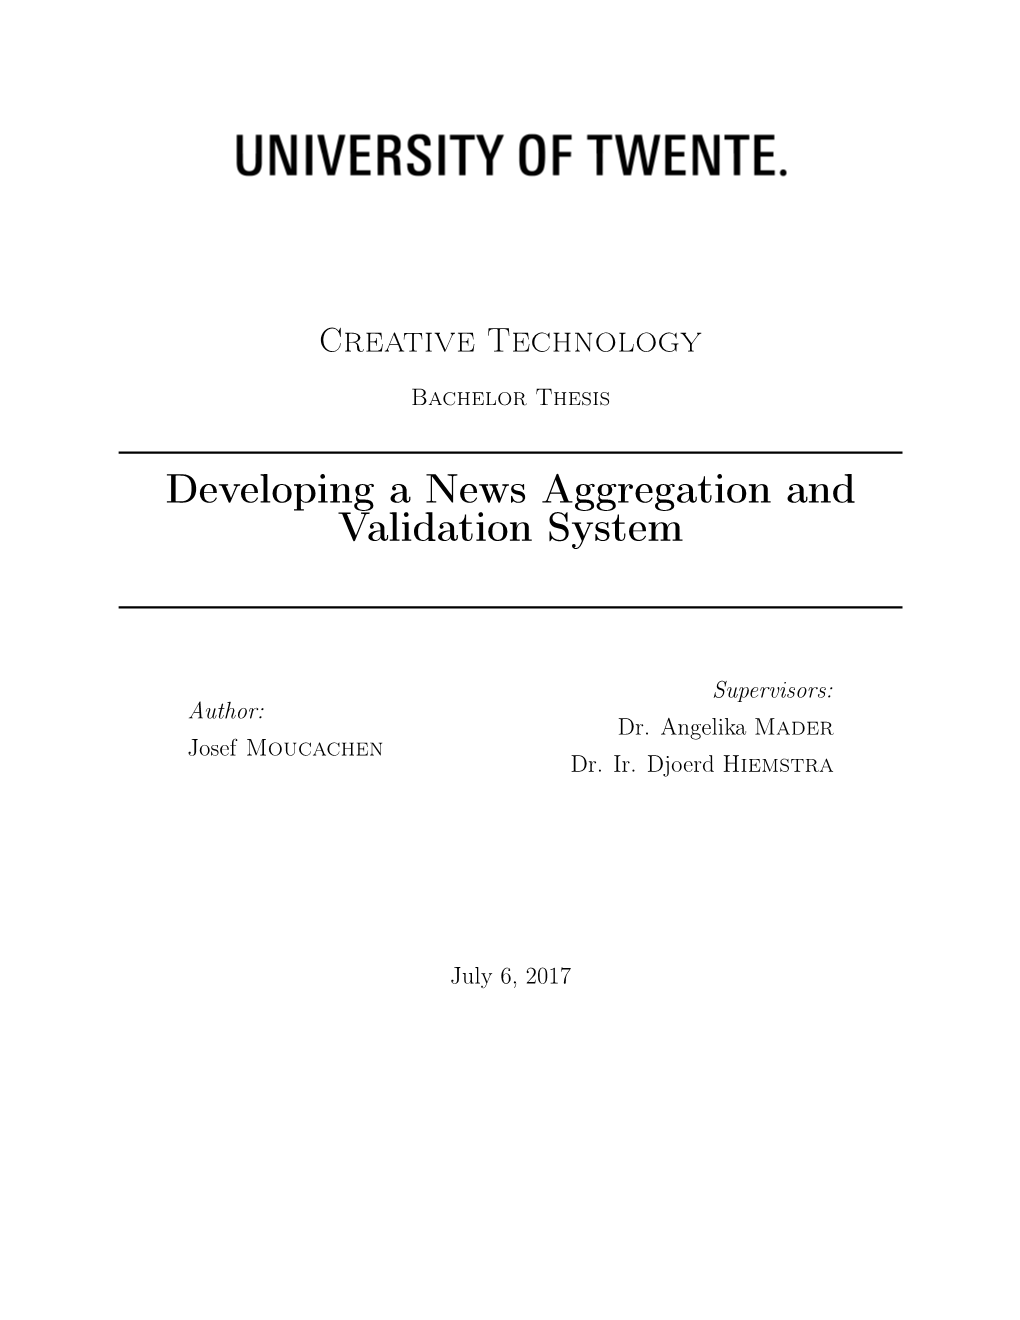 Developing a News Aggregation and Validation System